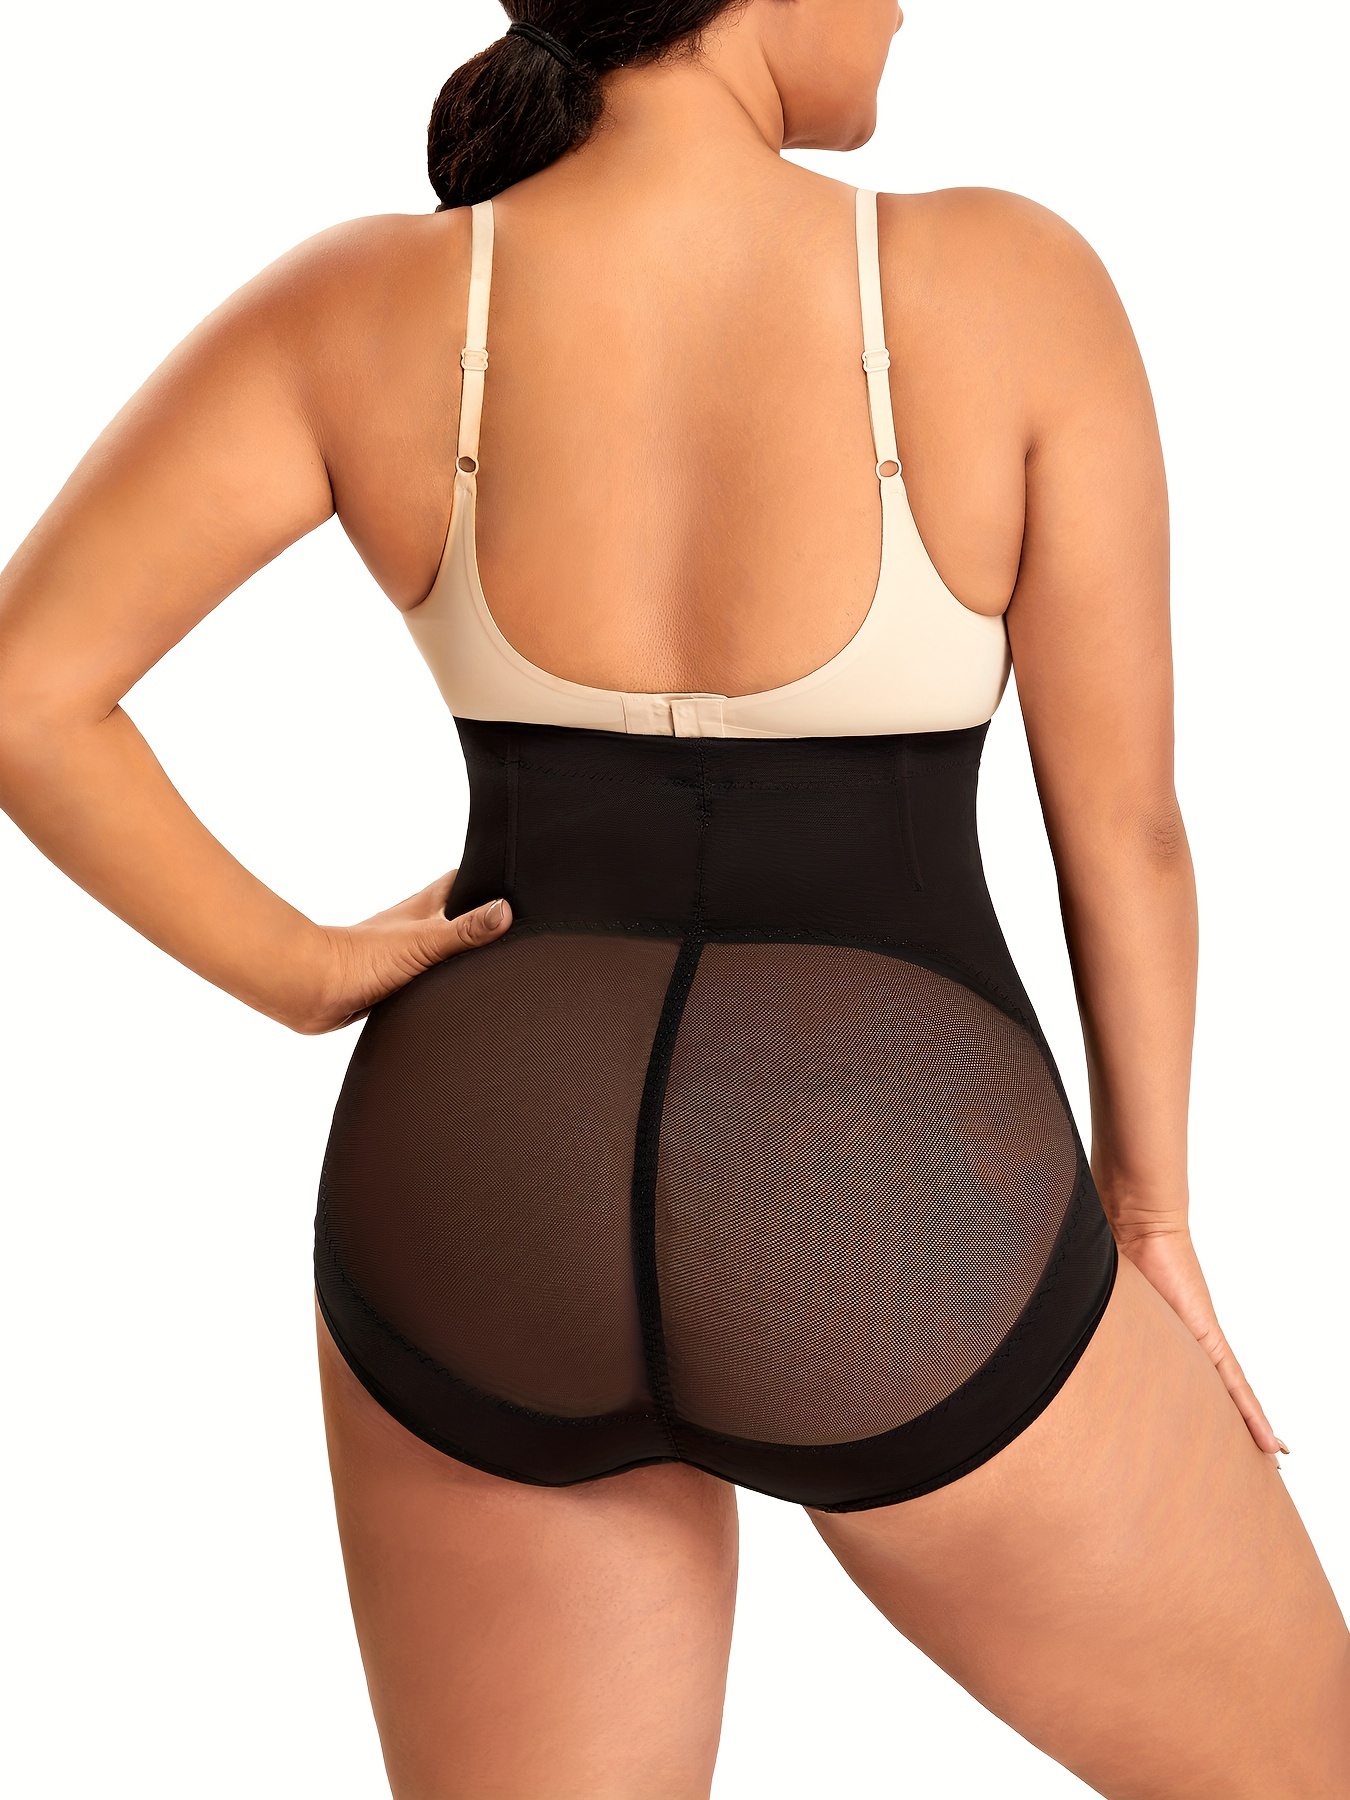 EXQUISITE FORM 2-Pack Floral Jacquard Slimming Body Shaper Panties